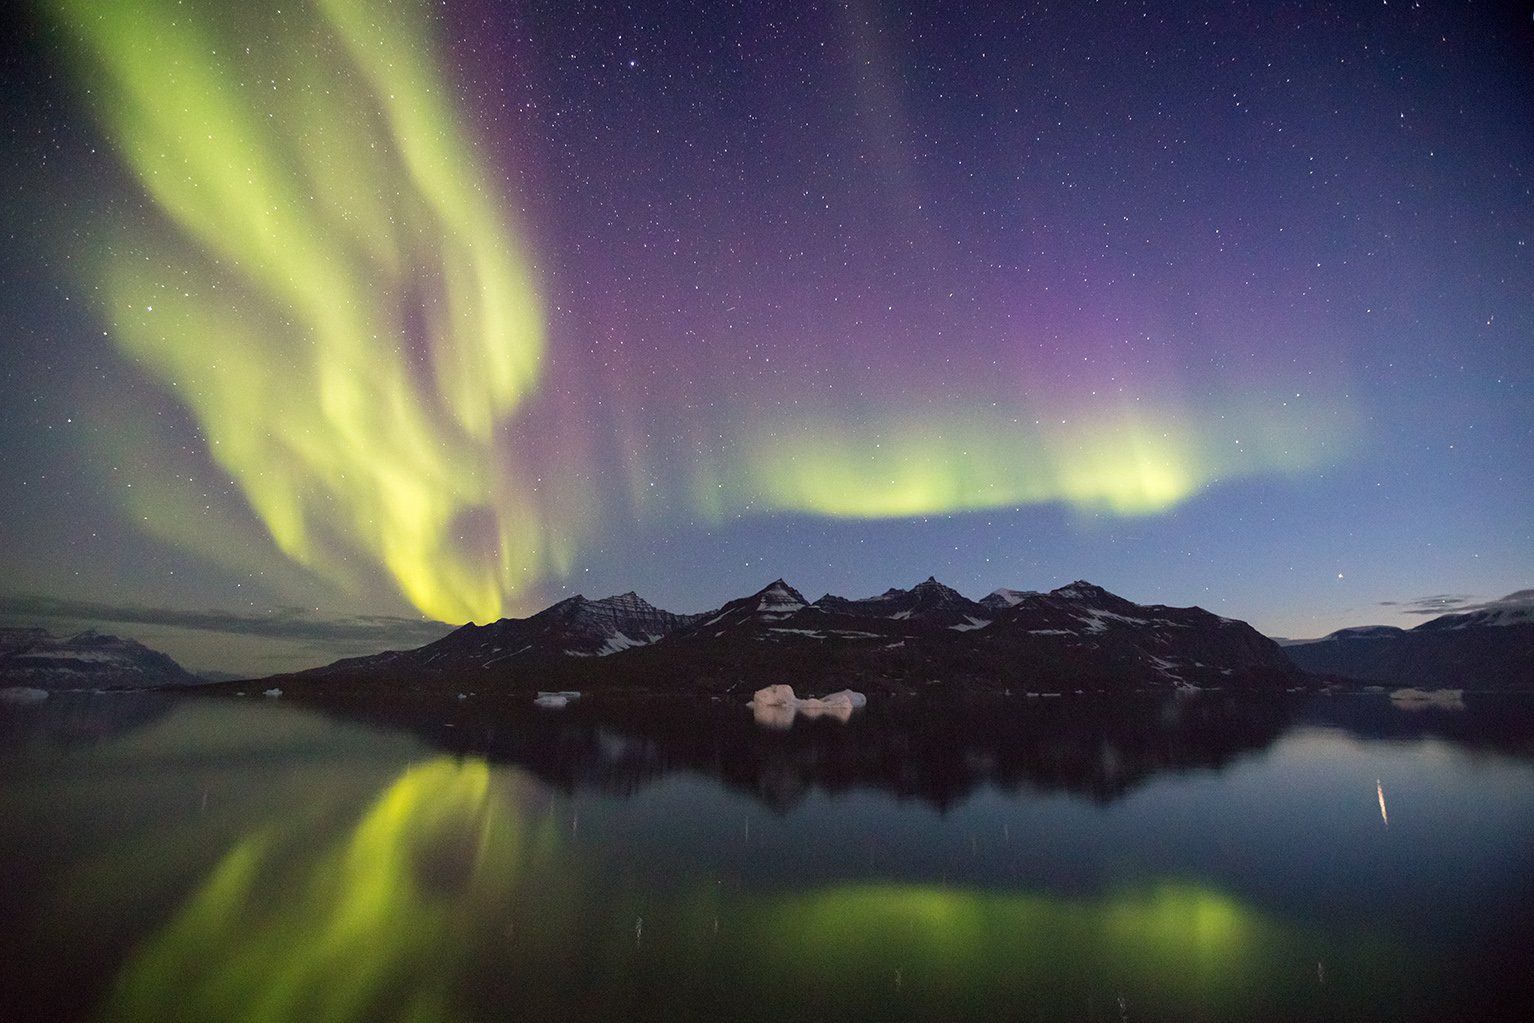 Quark Expeditions' guests who join the Under the Northern Lights: Exploring Iceland and East Greenland voyage have plenty of opportunities to witness the mesmerizing Aurora borealis.